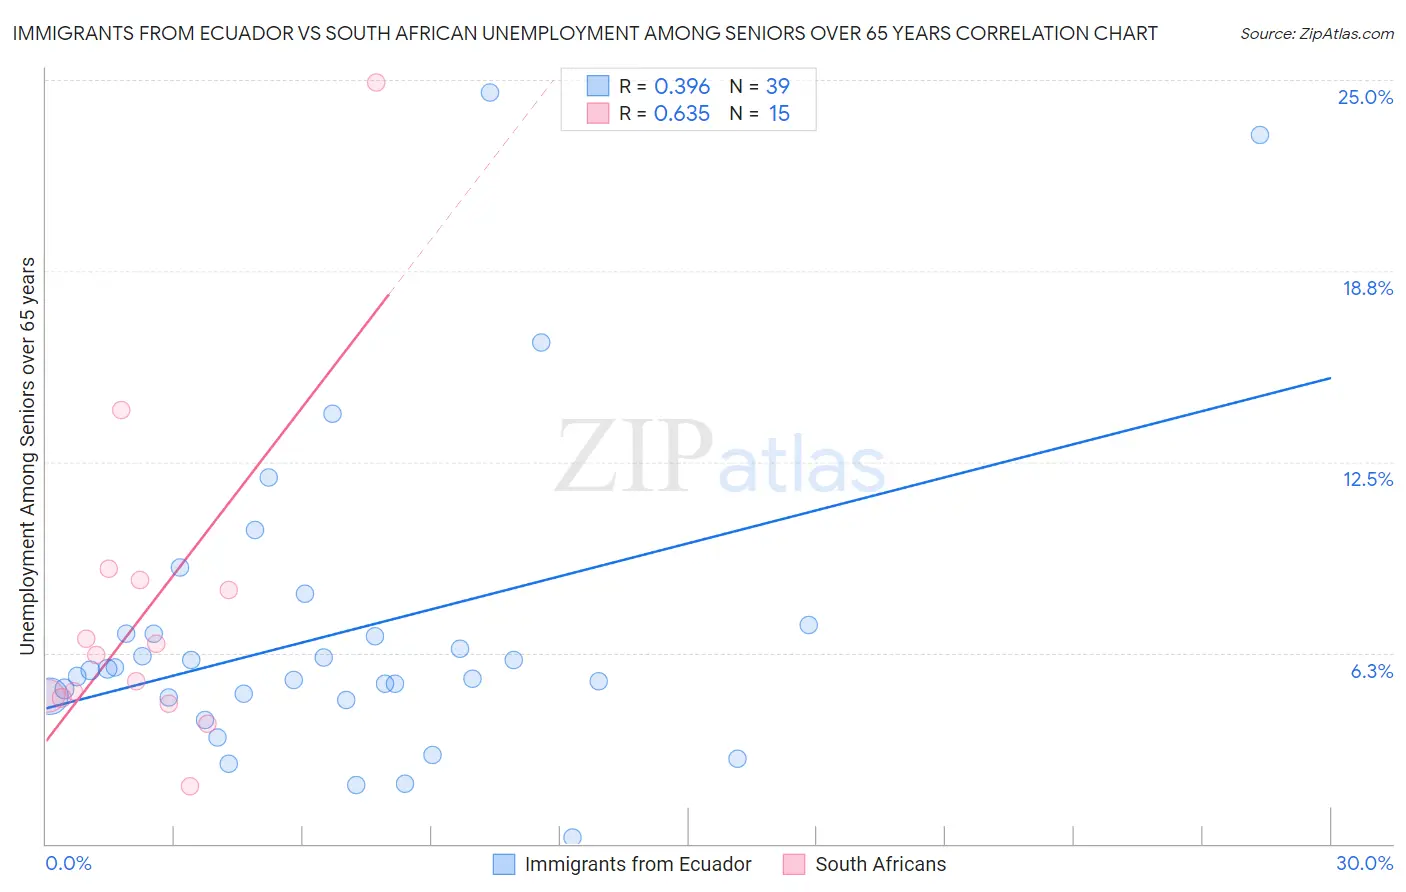 Immigrants from Ecuador vs South African Unemployment Among Seniors over 65 years